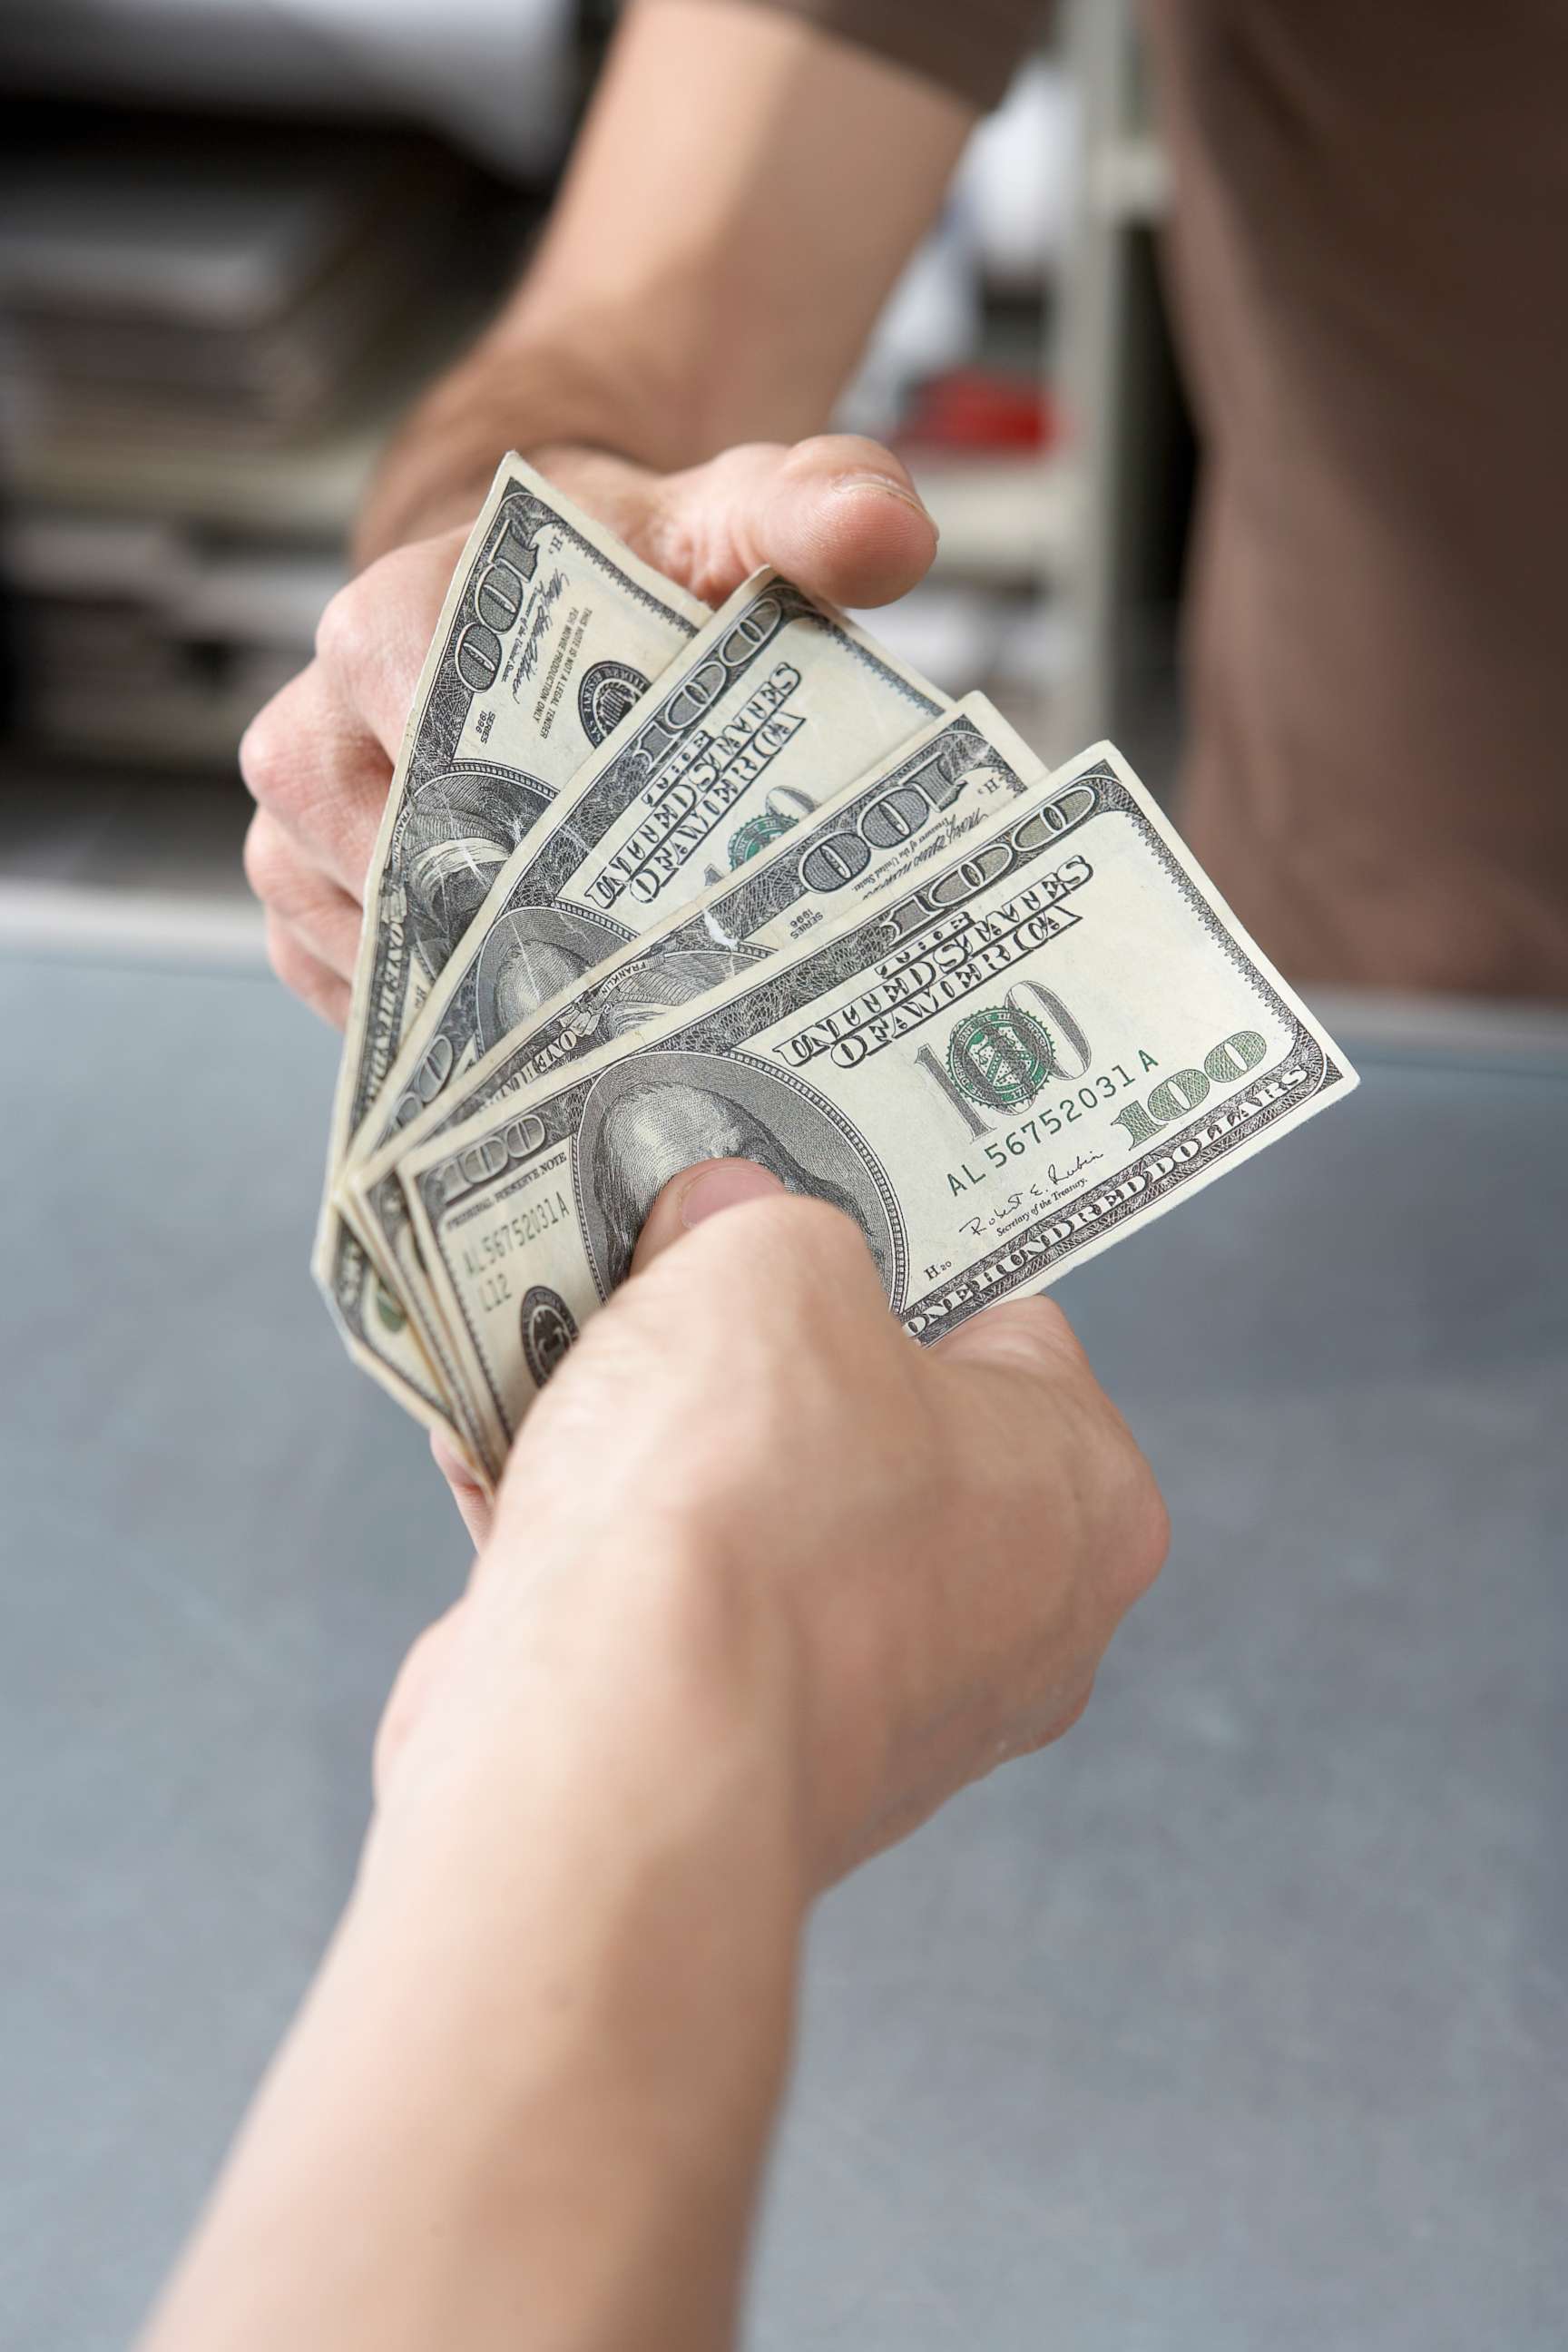 PHOTO: A man hands cash to another person in an undated stock photo.